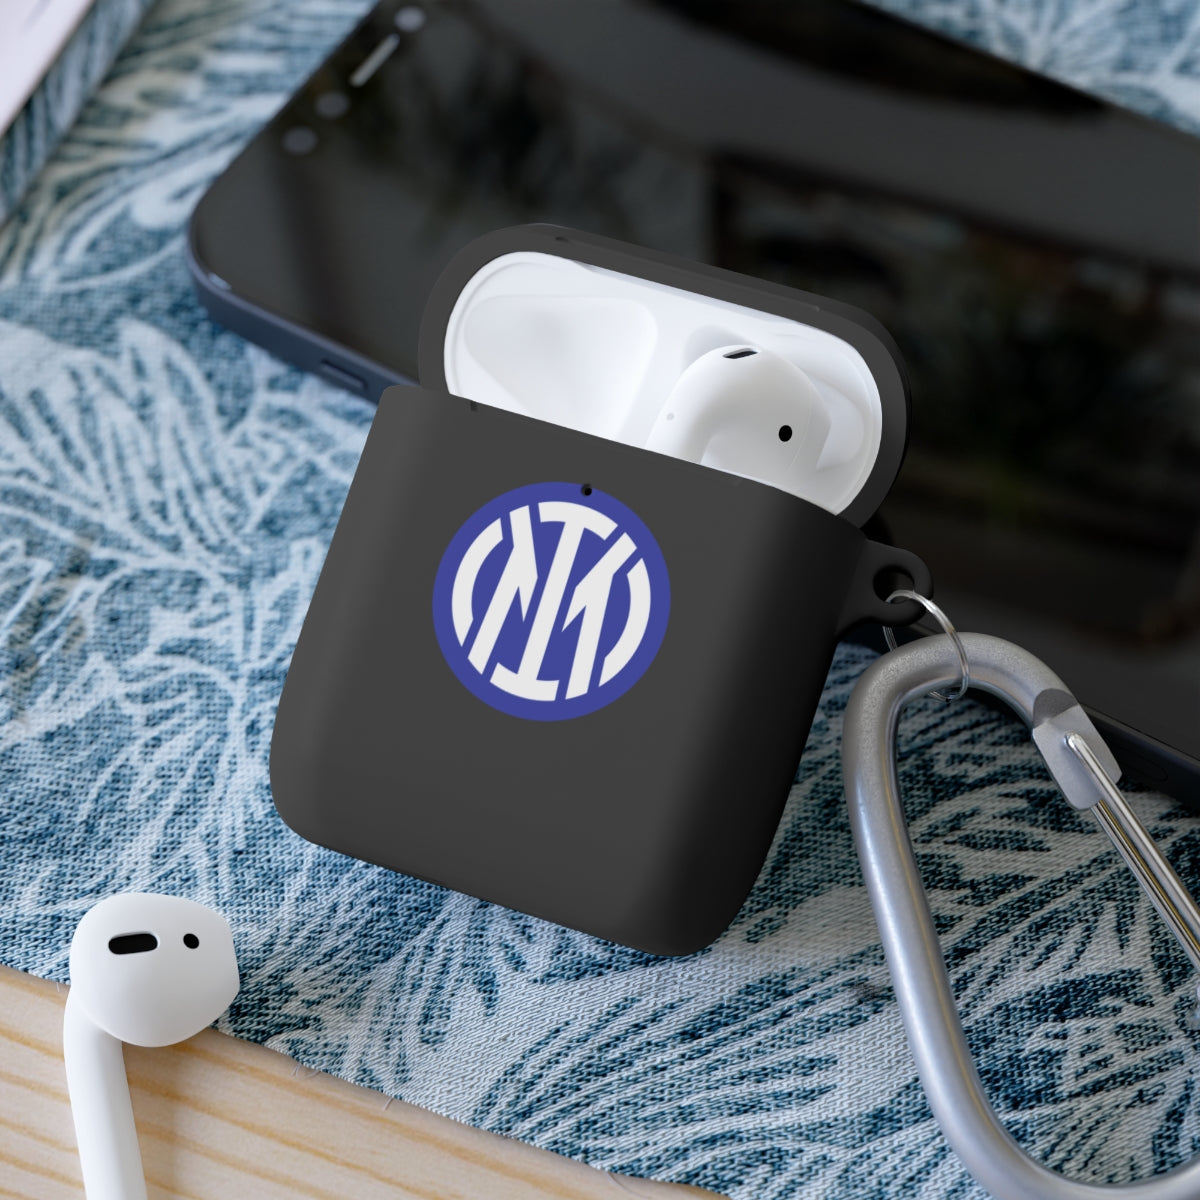 Inter Milan AirPods and AirPods Pro Case Cover